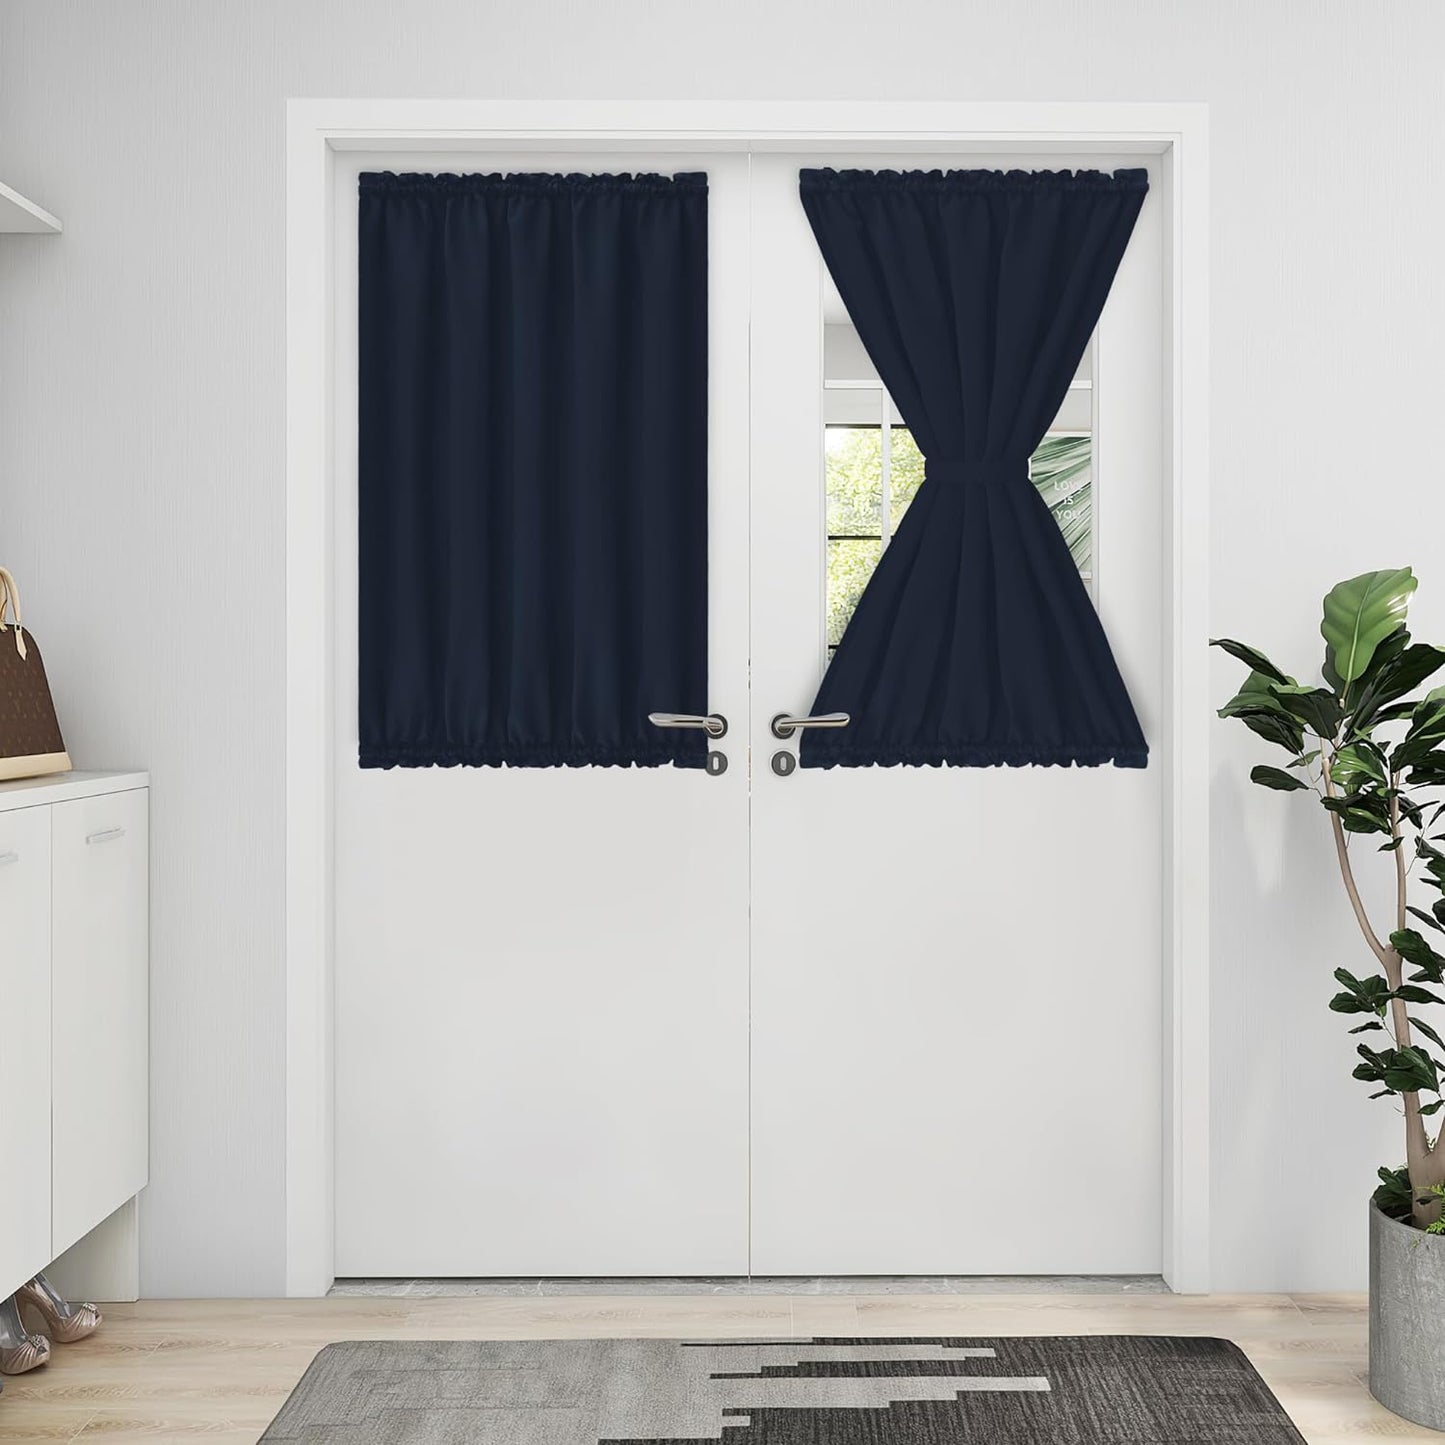 Easy-Going Blackout Door Curtains, Rod Pocket Privacy Light Filtering Sidelight Curtains French Door Curtains with Tieback, 1 Panel, 25X40 Inch, Gray  Easy-Going Navy W25 X L40 Inch 